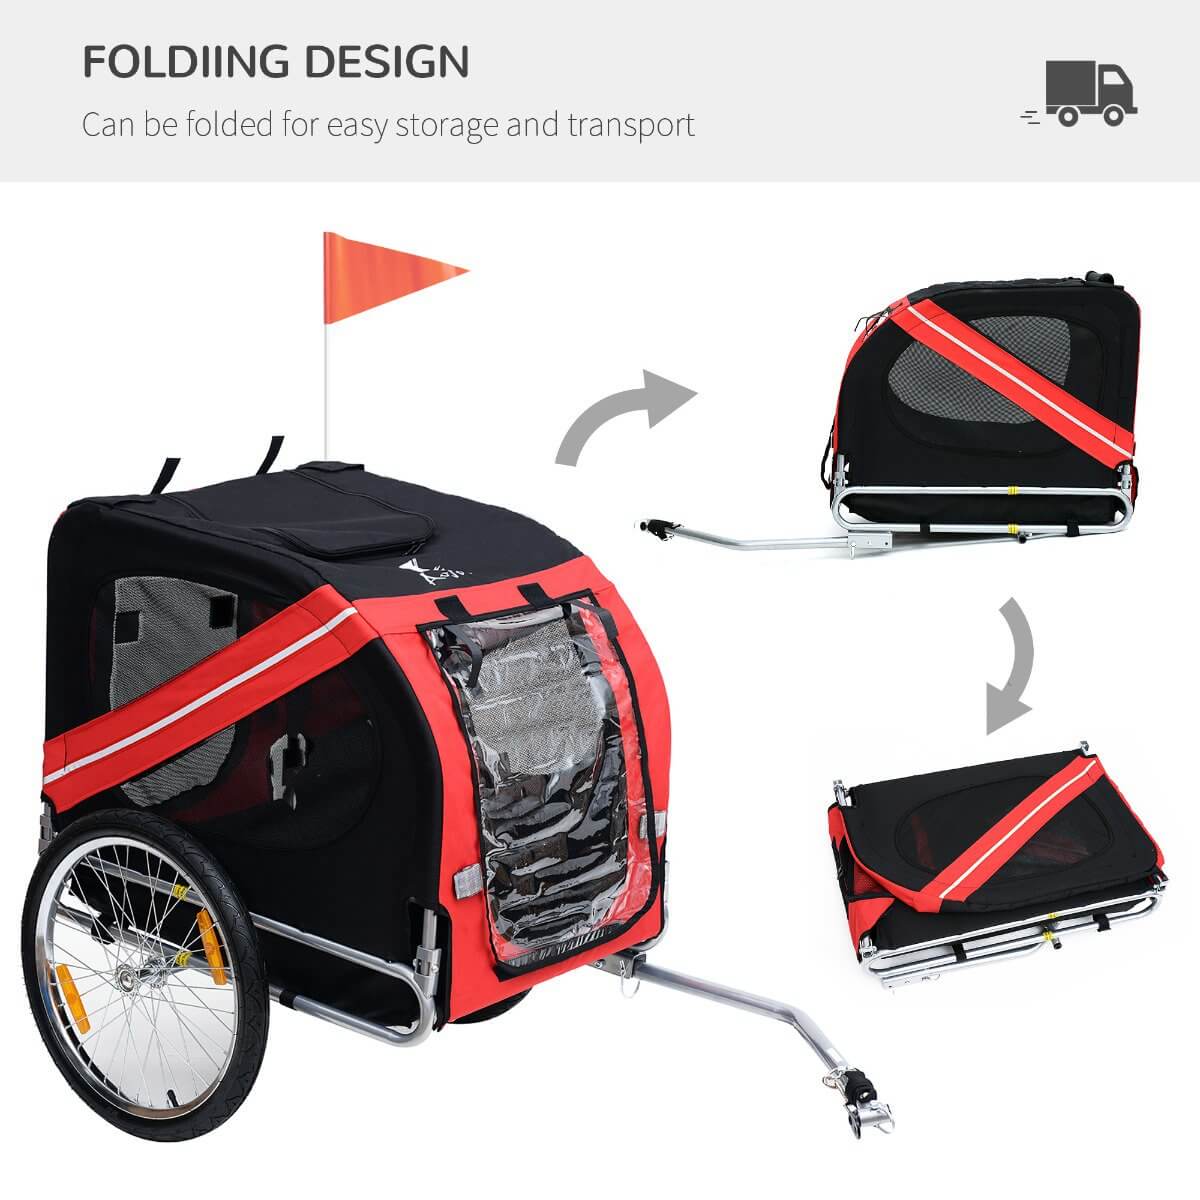 dog bike trailers the best choice as it is easy to fold and carry